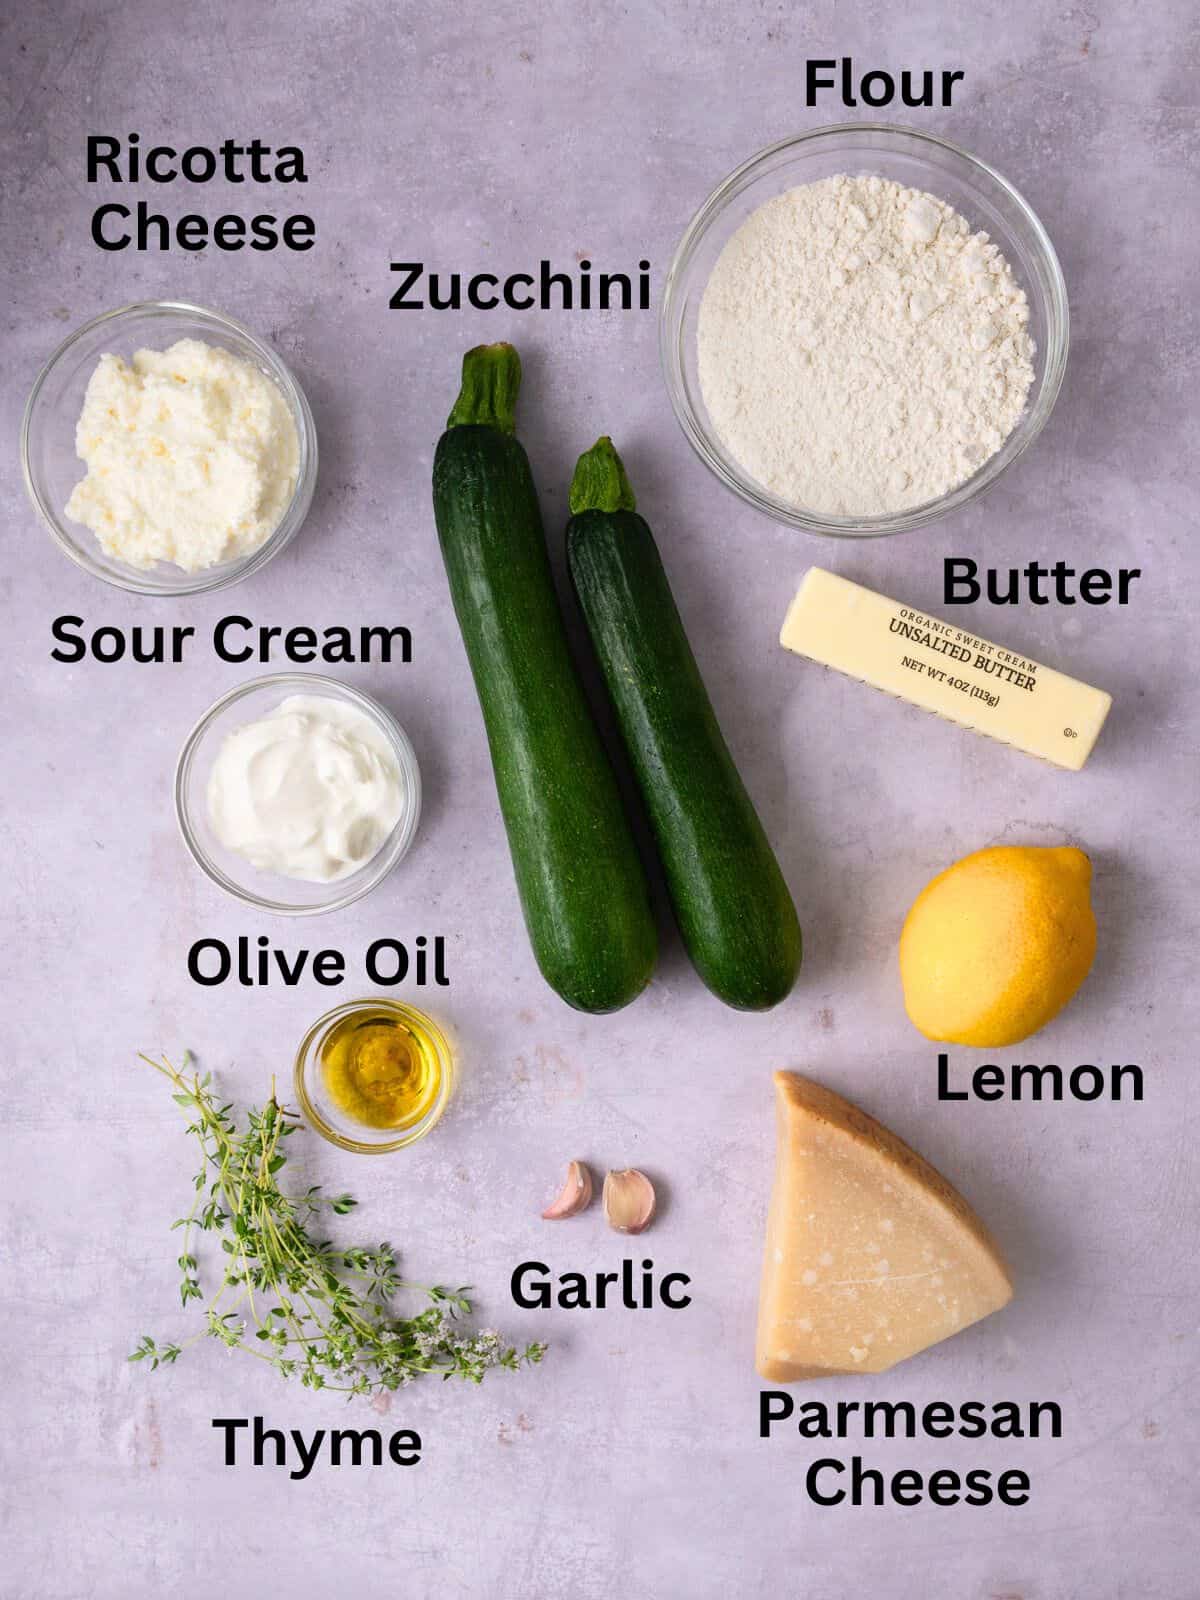 Ingredients for zucchini galette, including sour cream, Parmesan cheese and fresh thyme.